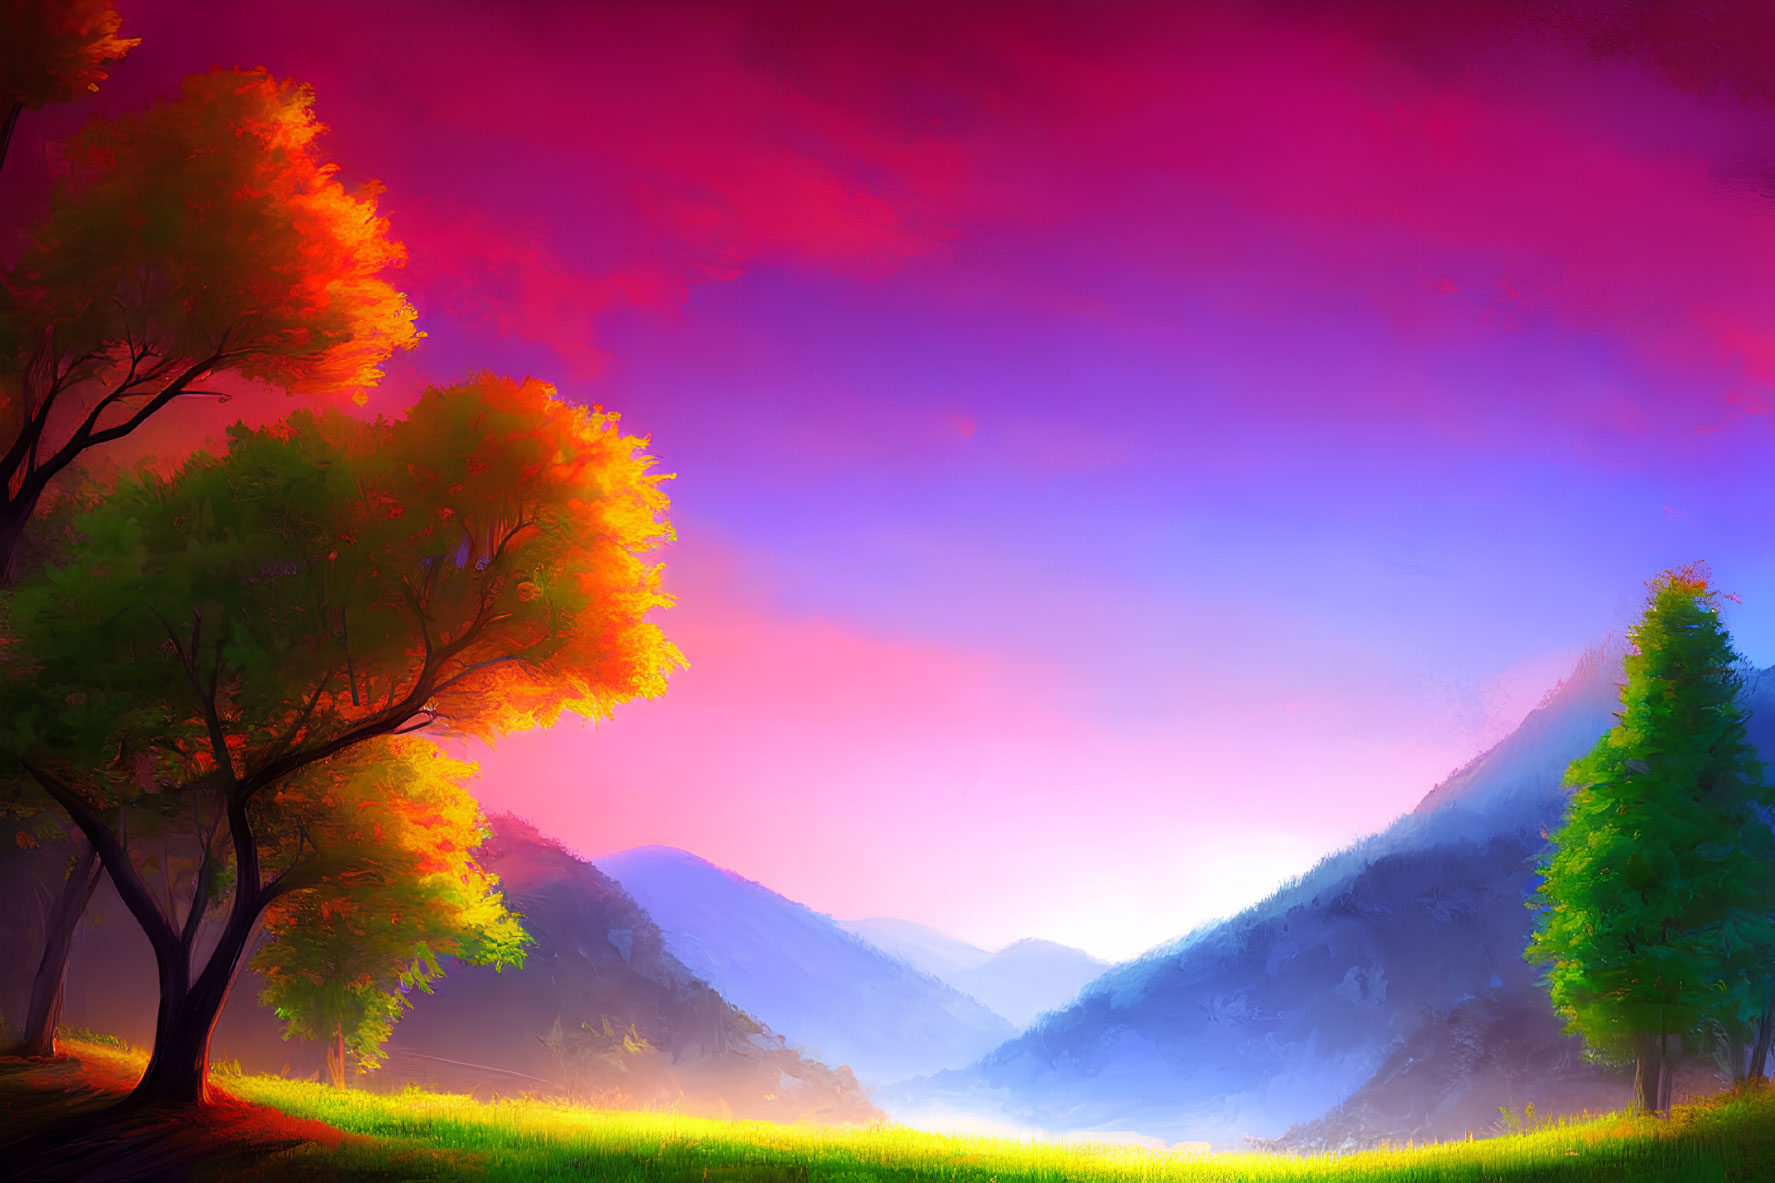 Scenic valley digital art: vivid skies, colorful trees, misty mountains